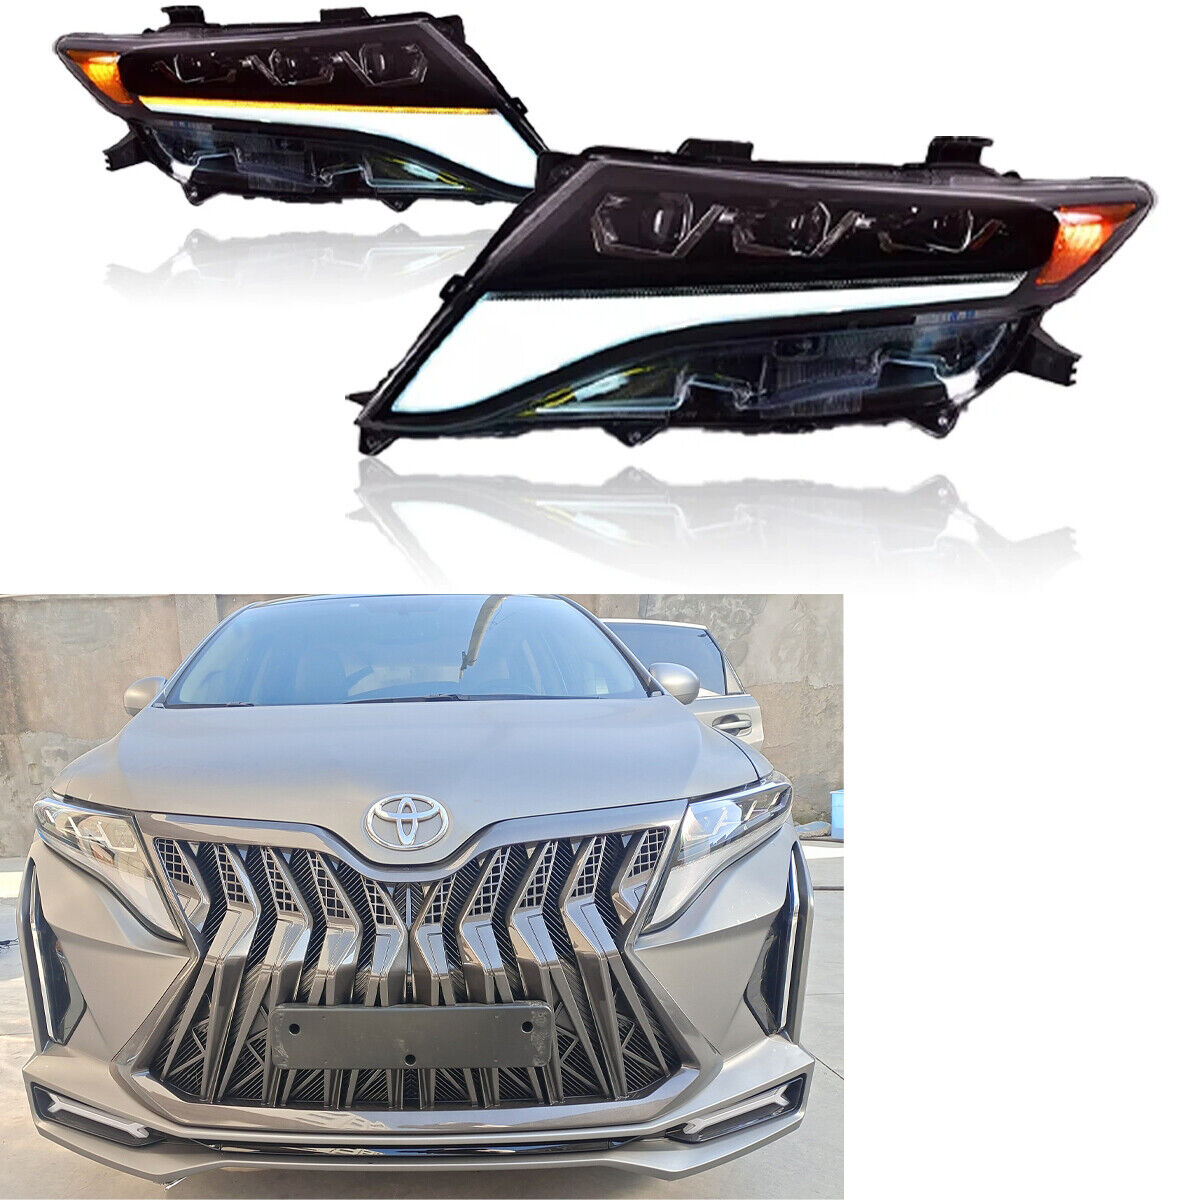 LED Headlight Upgrade For Toyota Venza 2009-2013 Projector DRL Animation Lamps